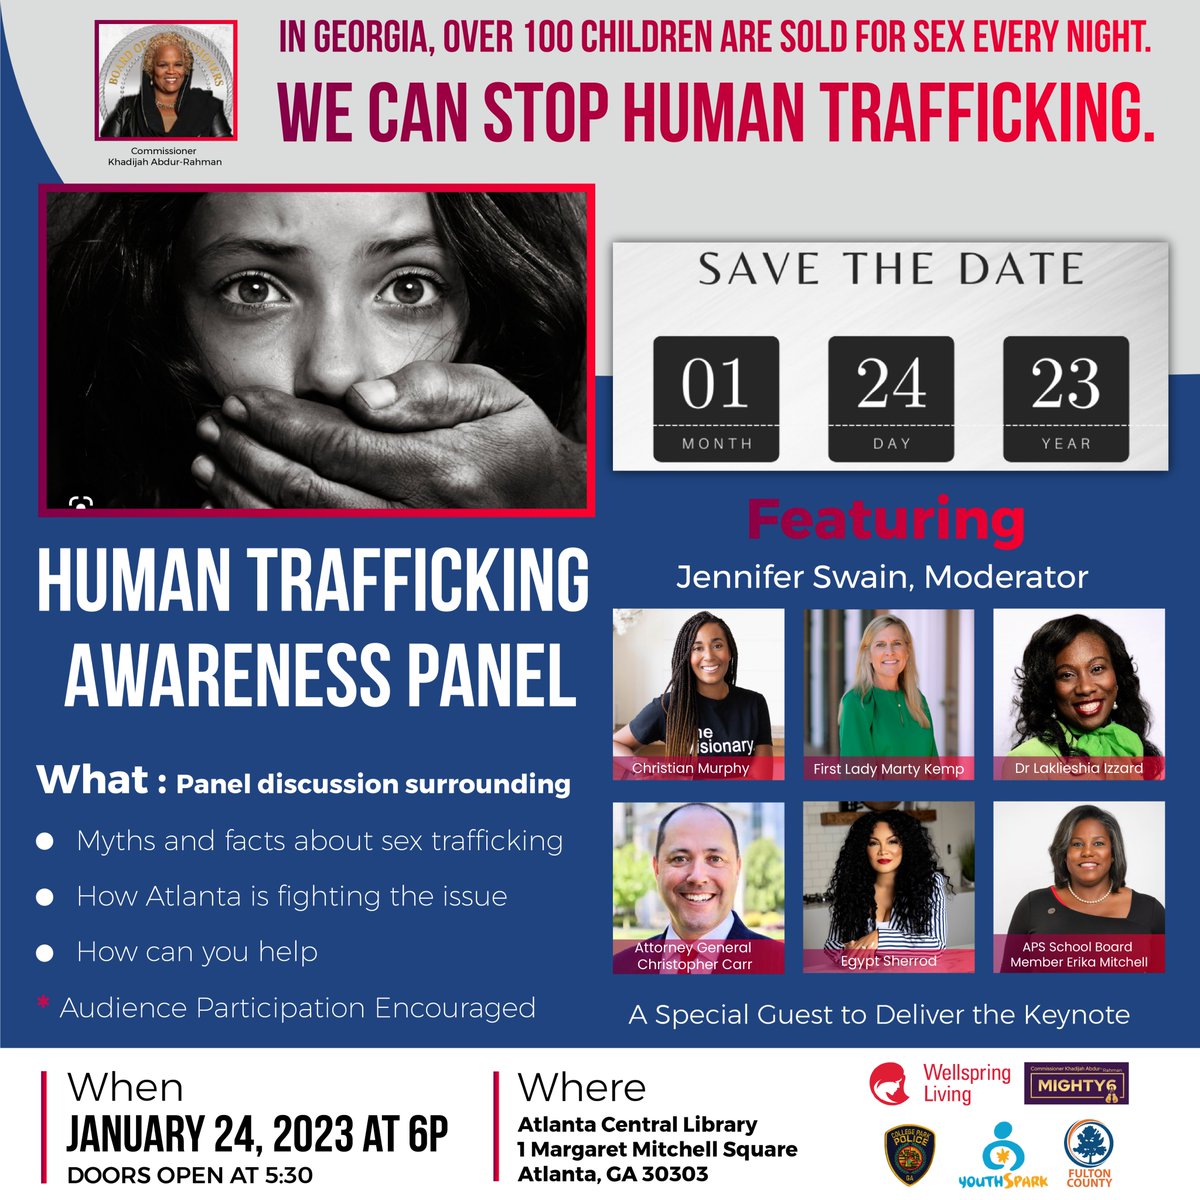 Join Me Tuesday, January 24th. We can STOP Sex Trafficking.